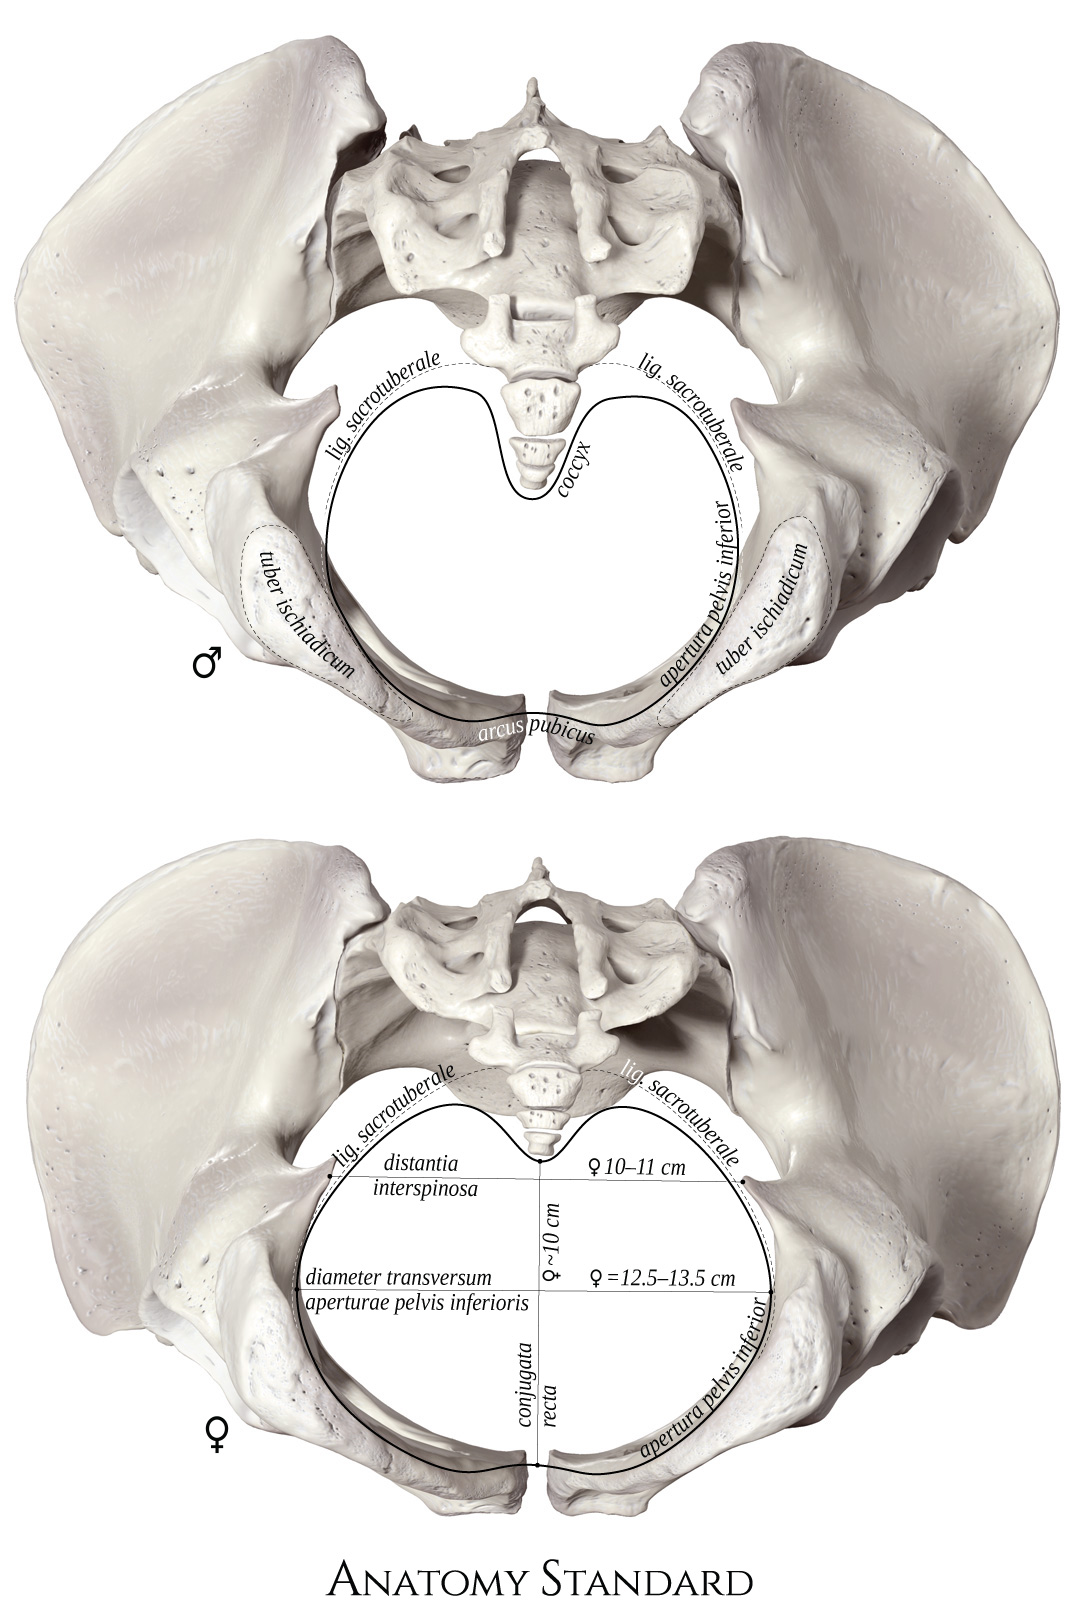 Anatomy Standard Drawing Bony Pelvis Differences Between Male And Female Inferior View 3273